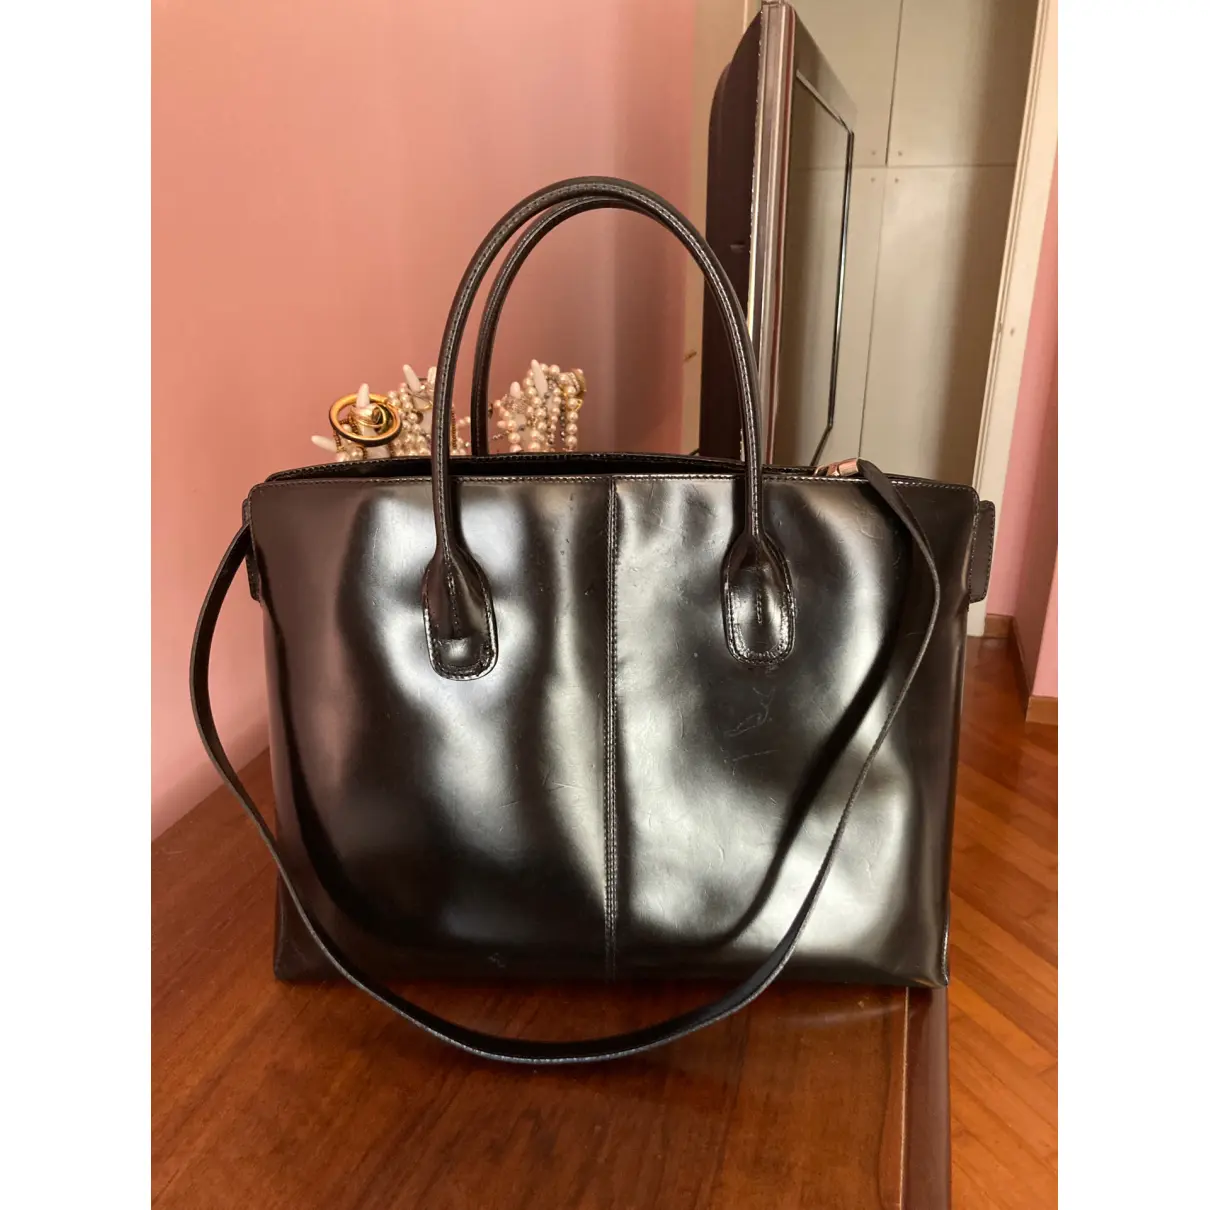 Buy Tod's D Bag leather tote online